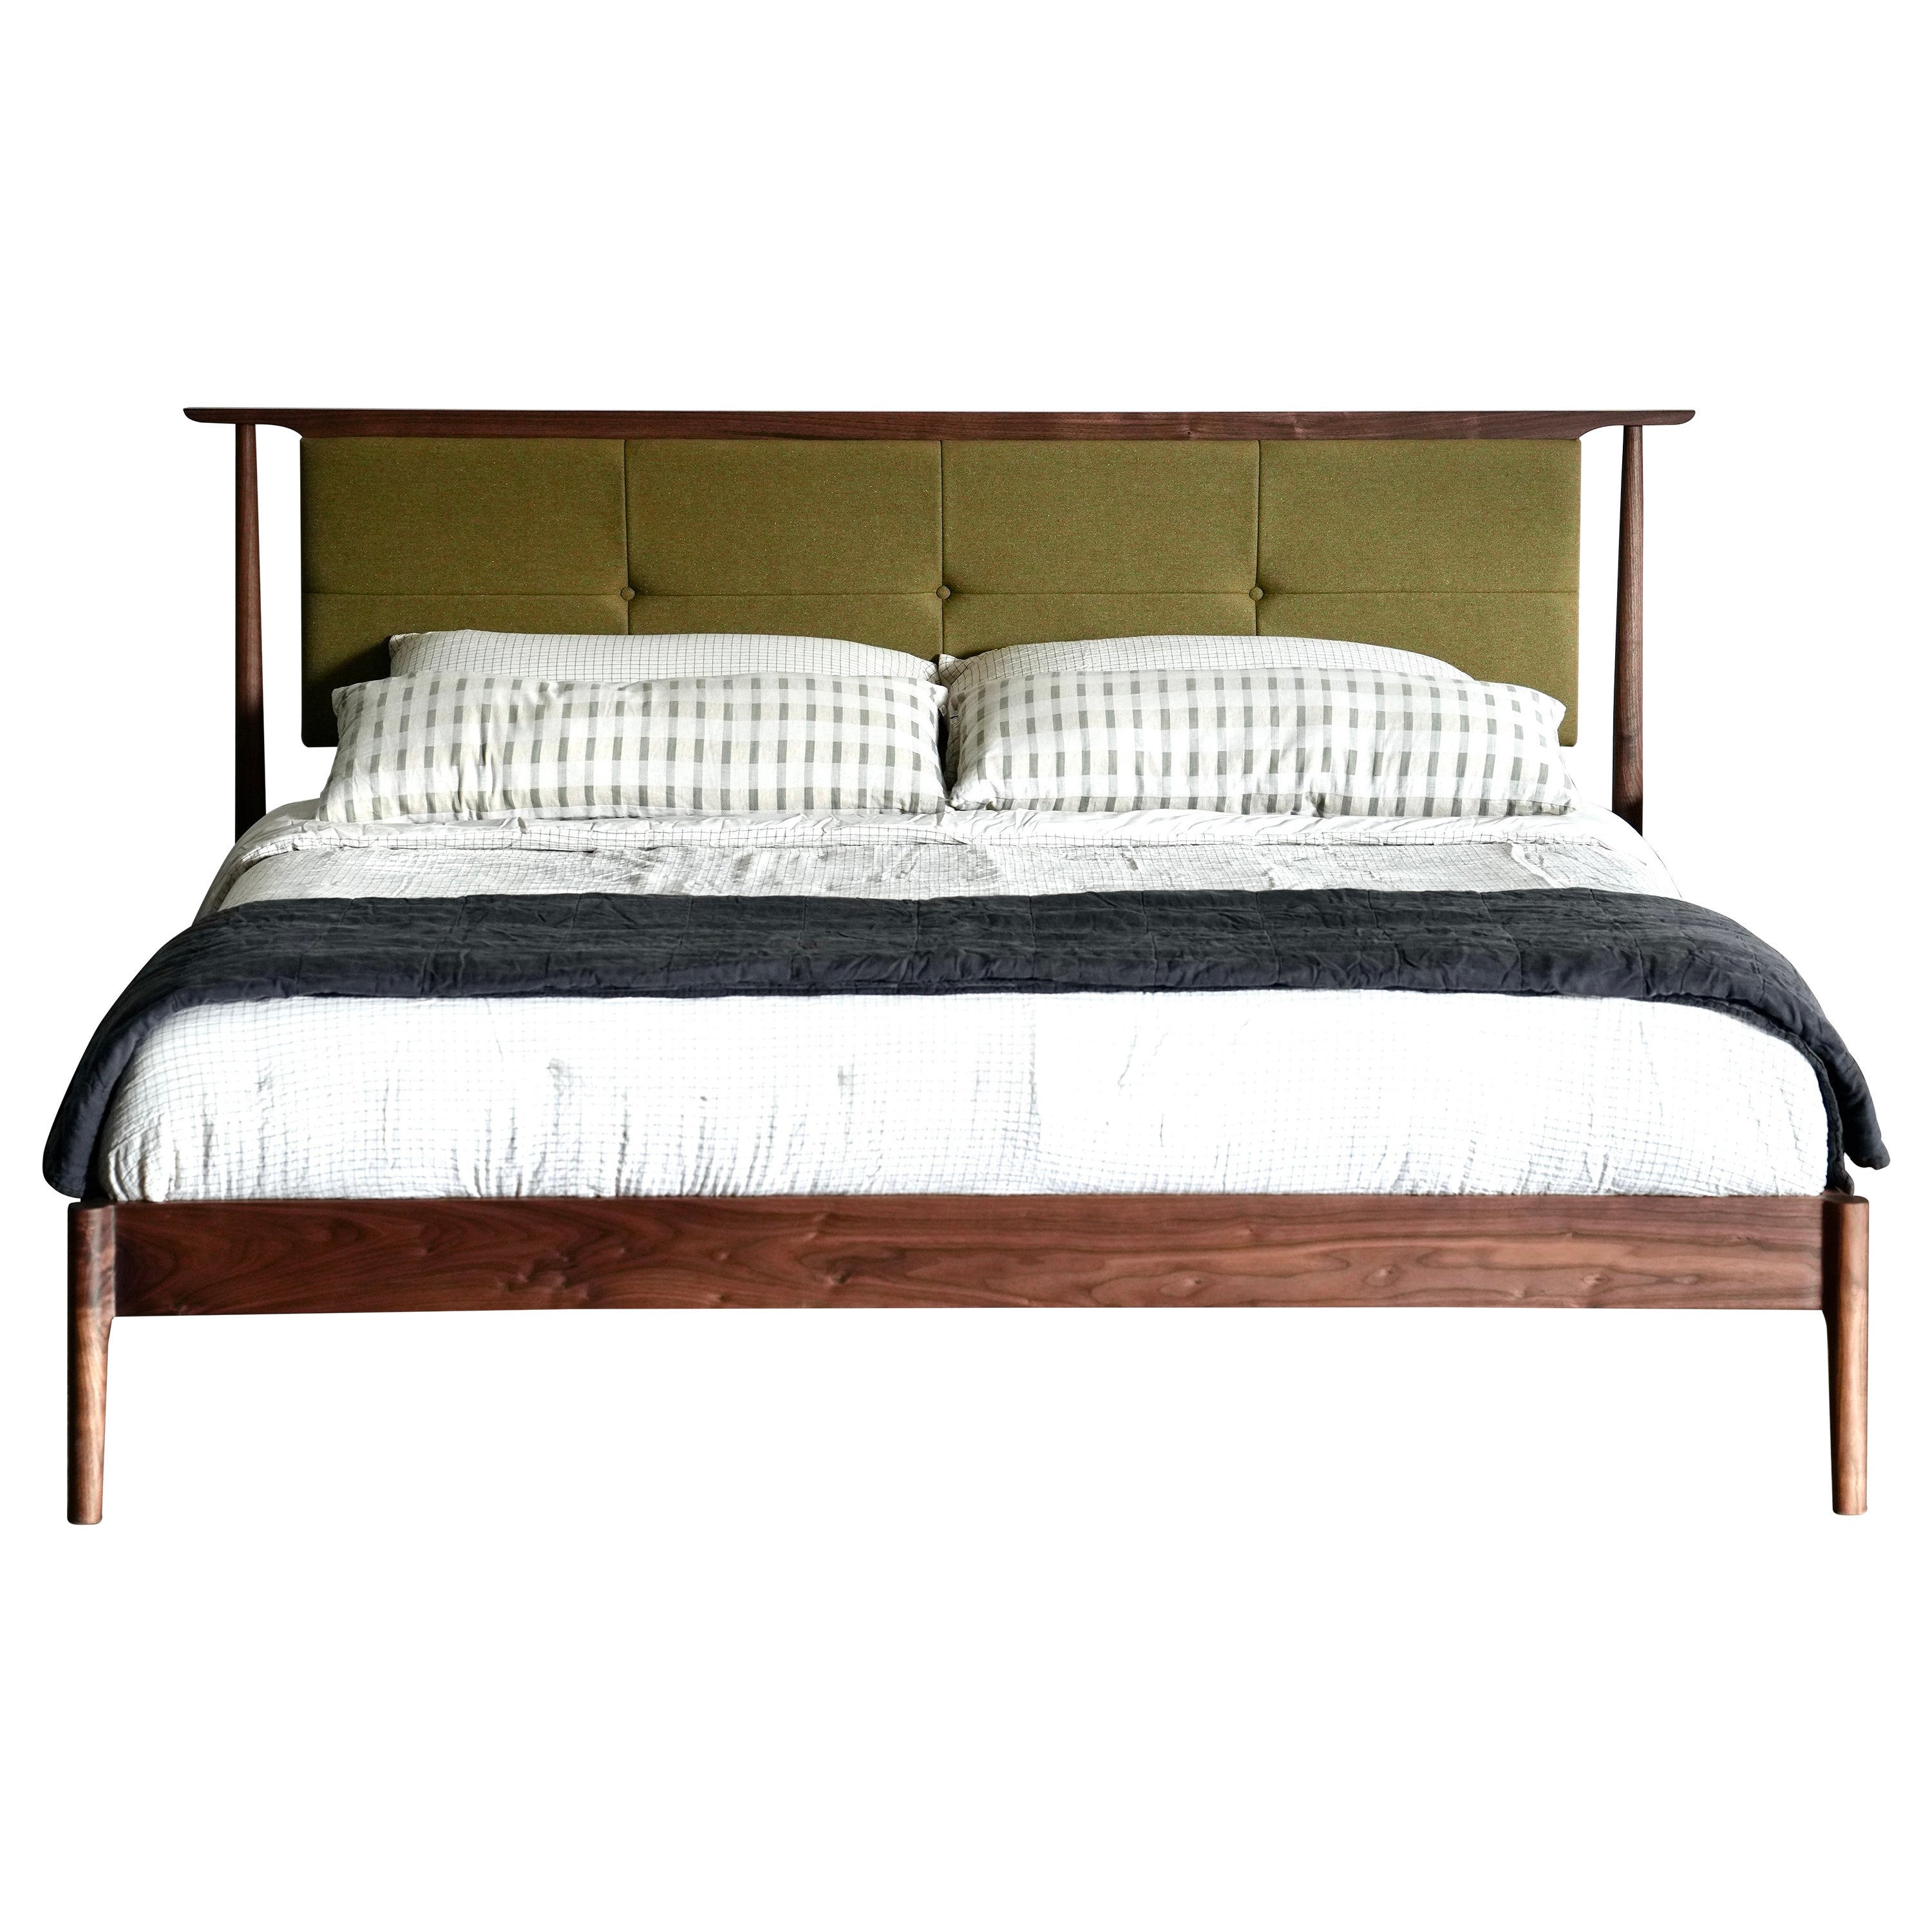 Mid Century Modern Platform Bed With Upholstered Headboard For Sale